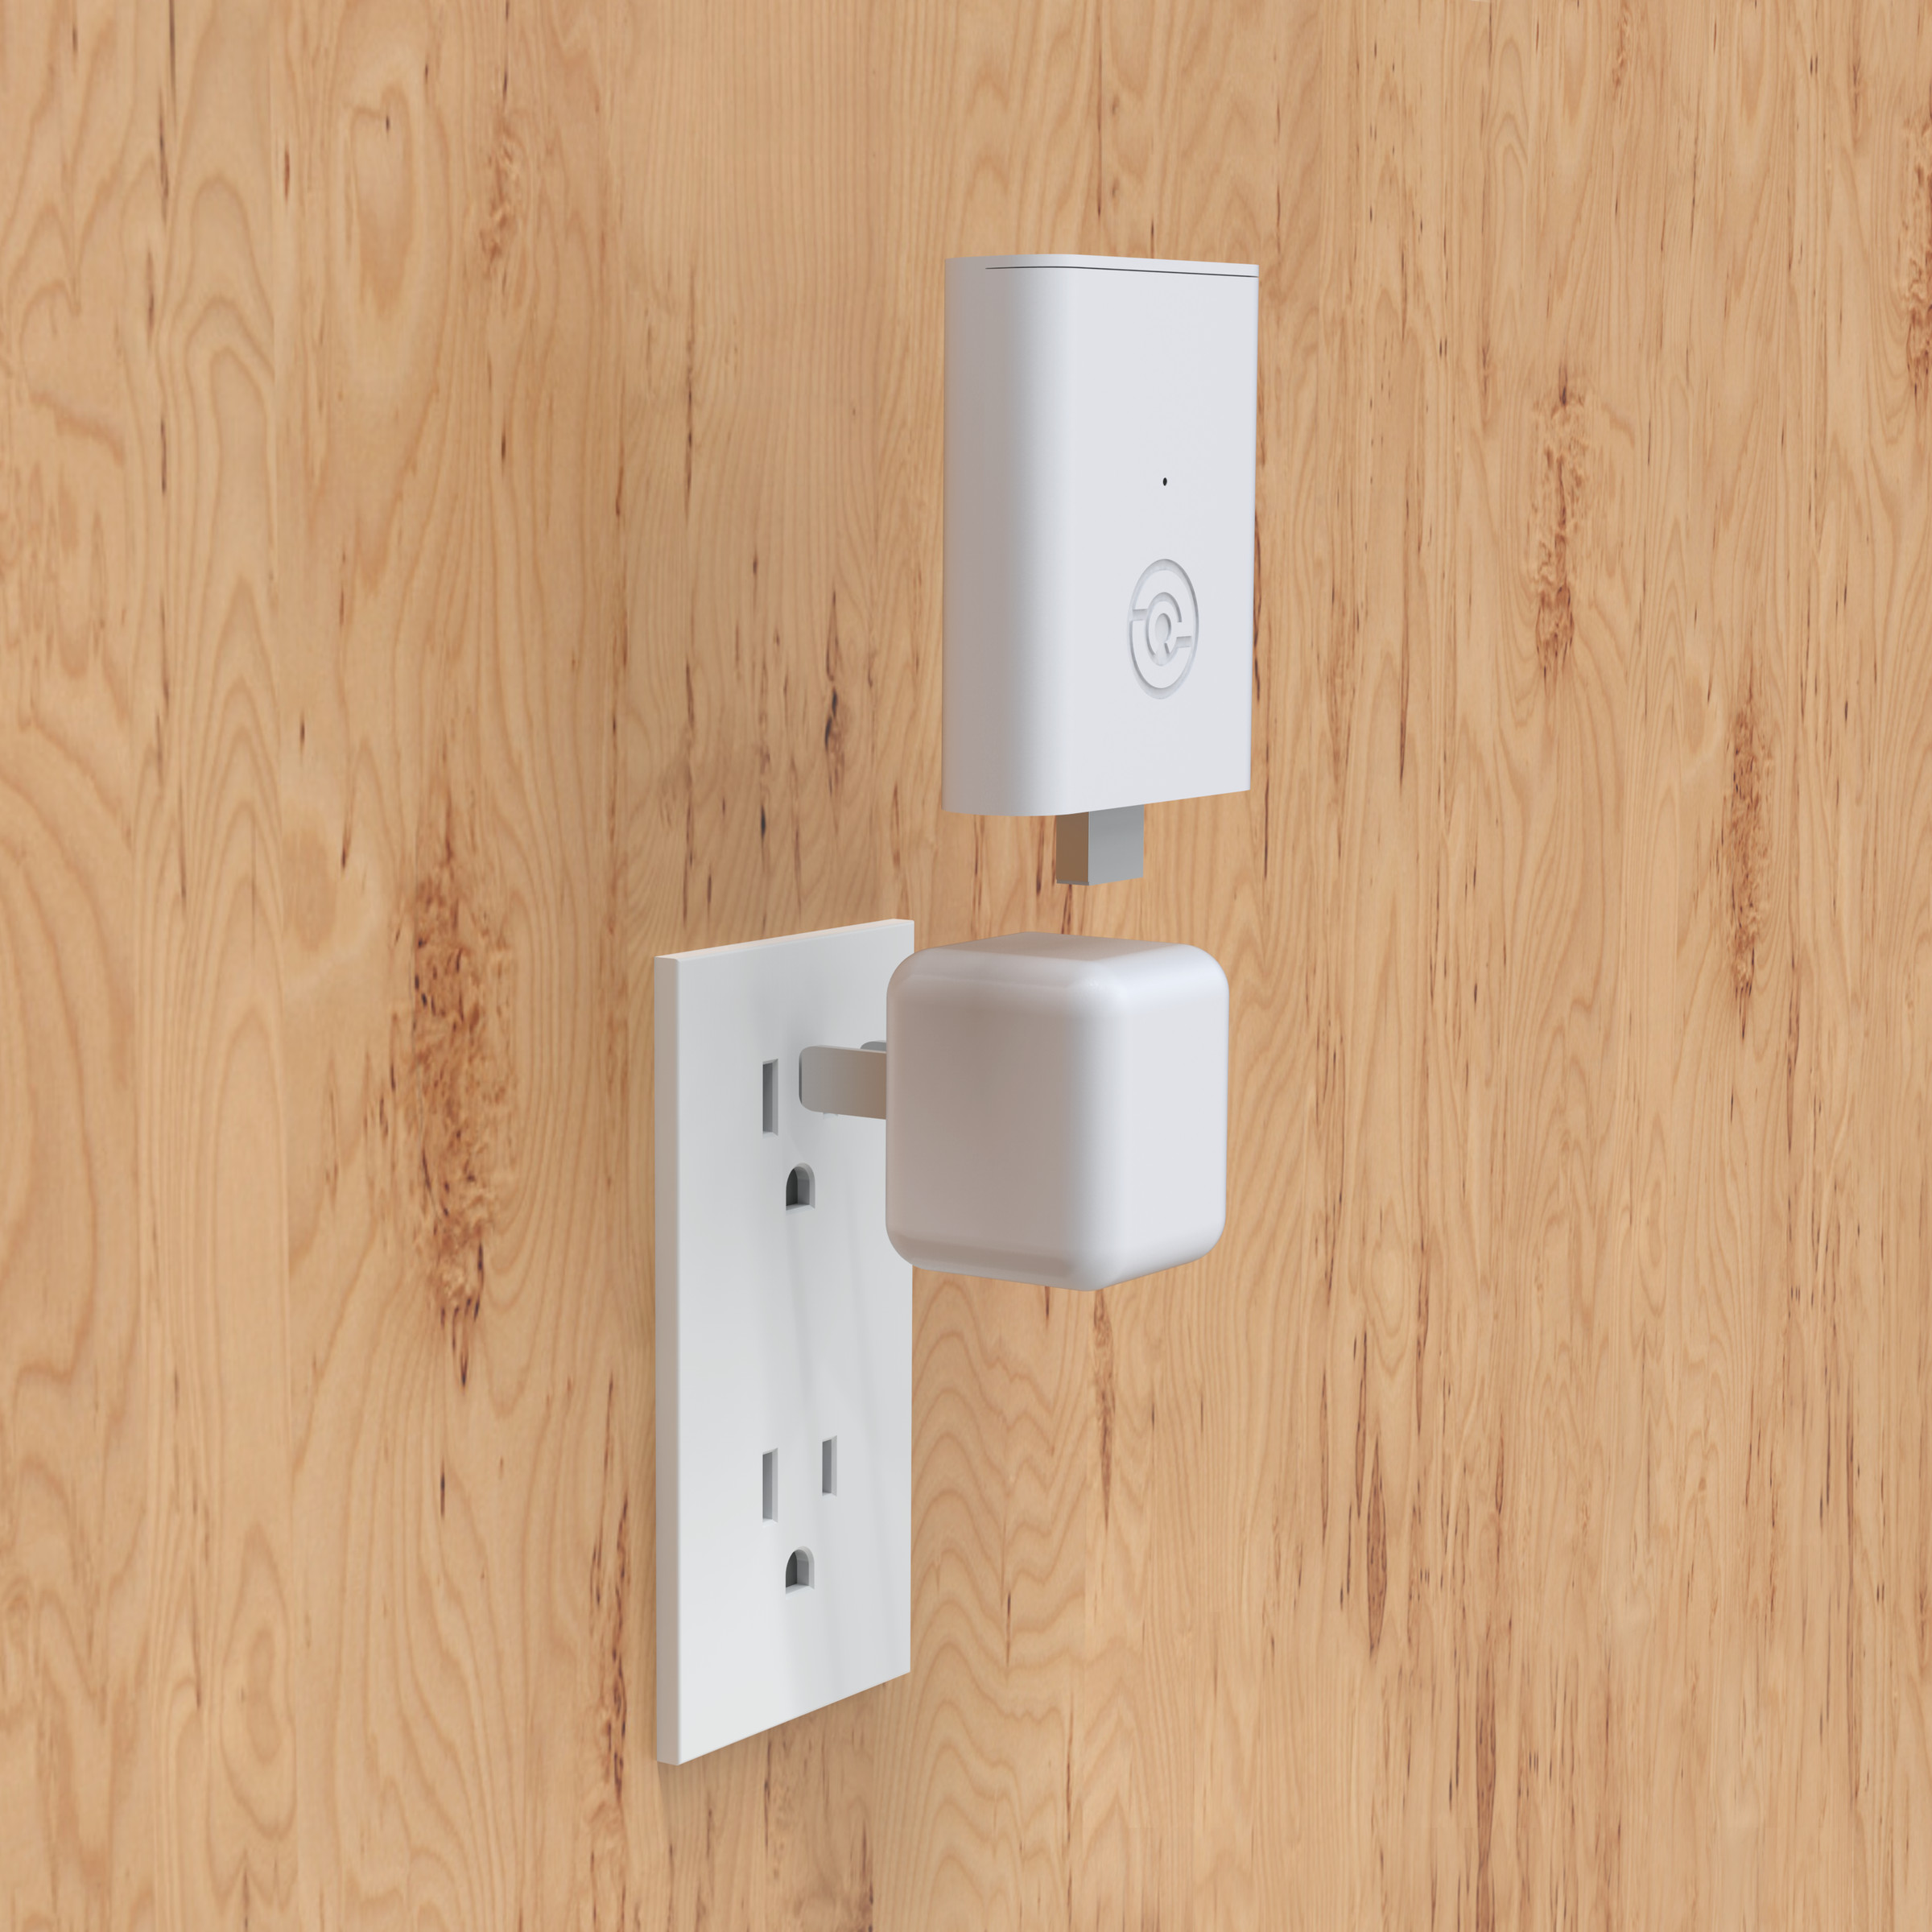 The $79.99 Lockly Matter Link Hub will connect Lockly’s existing locks to the new Matter smart home standard.